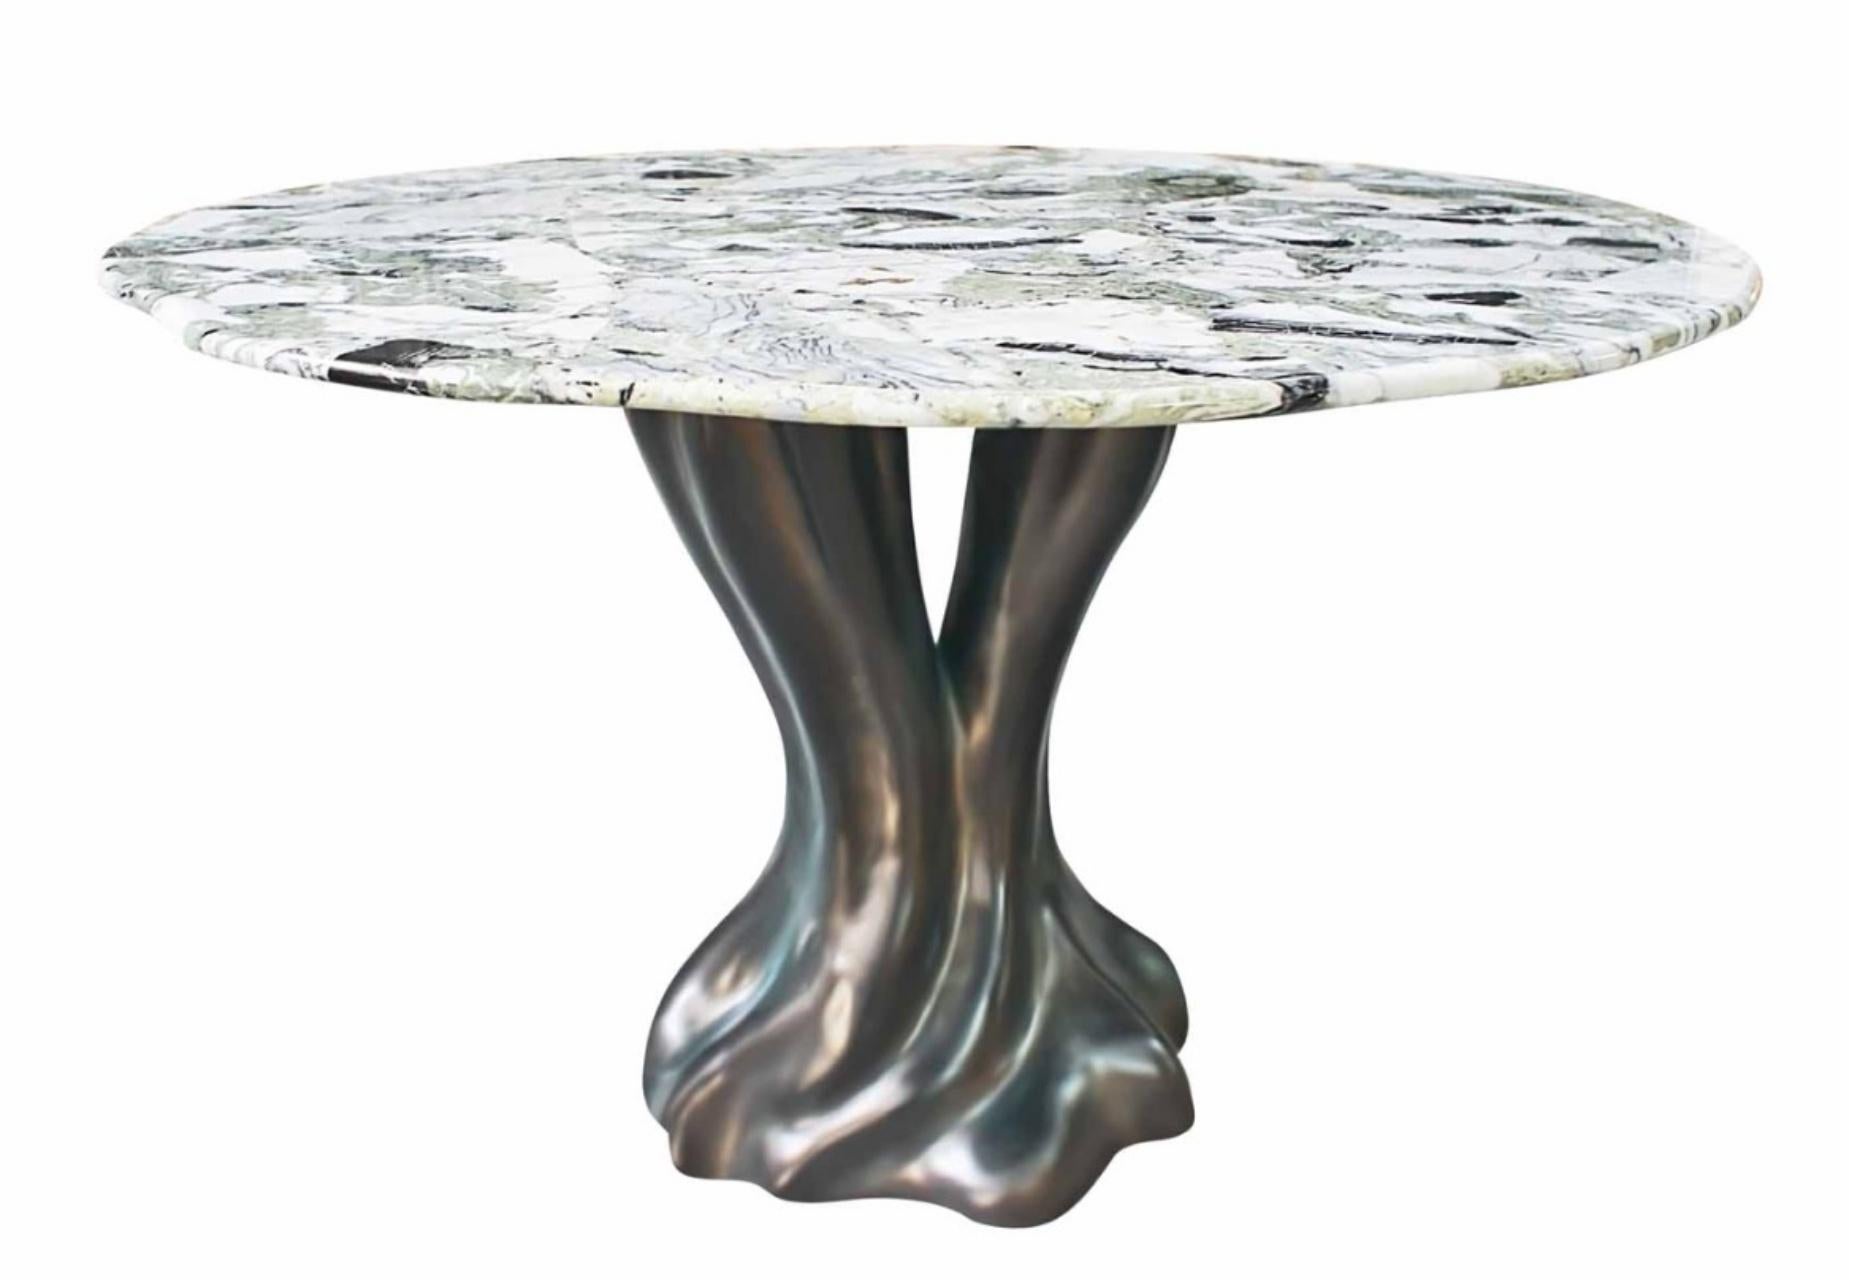 Dining table

General information

Dimensions (cm): Ø120 x 75
Dimensions (in): Ø47.2 x 29.5
seats: 4 a 6

Materials and Colors

Top: ice jade marble;
Base: resin reinforced with fiberglass finished in bronze color.



